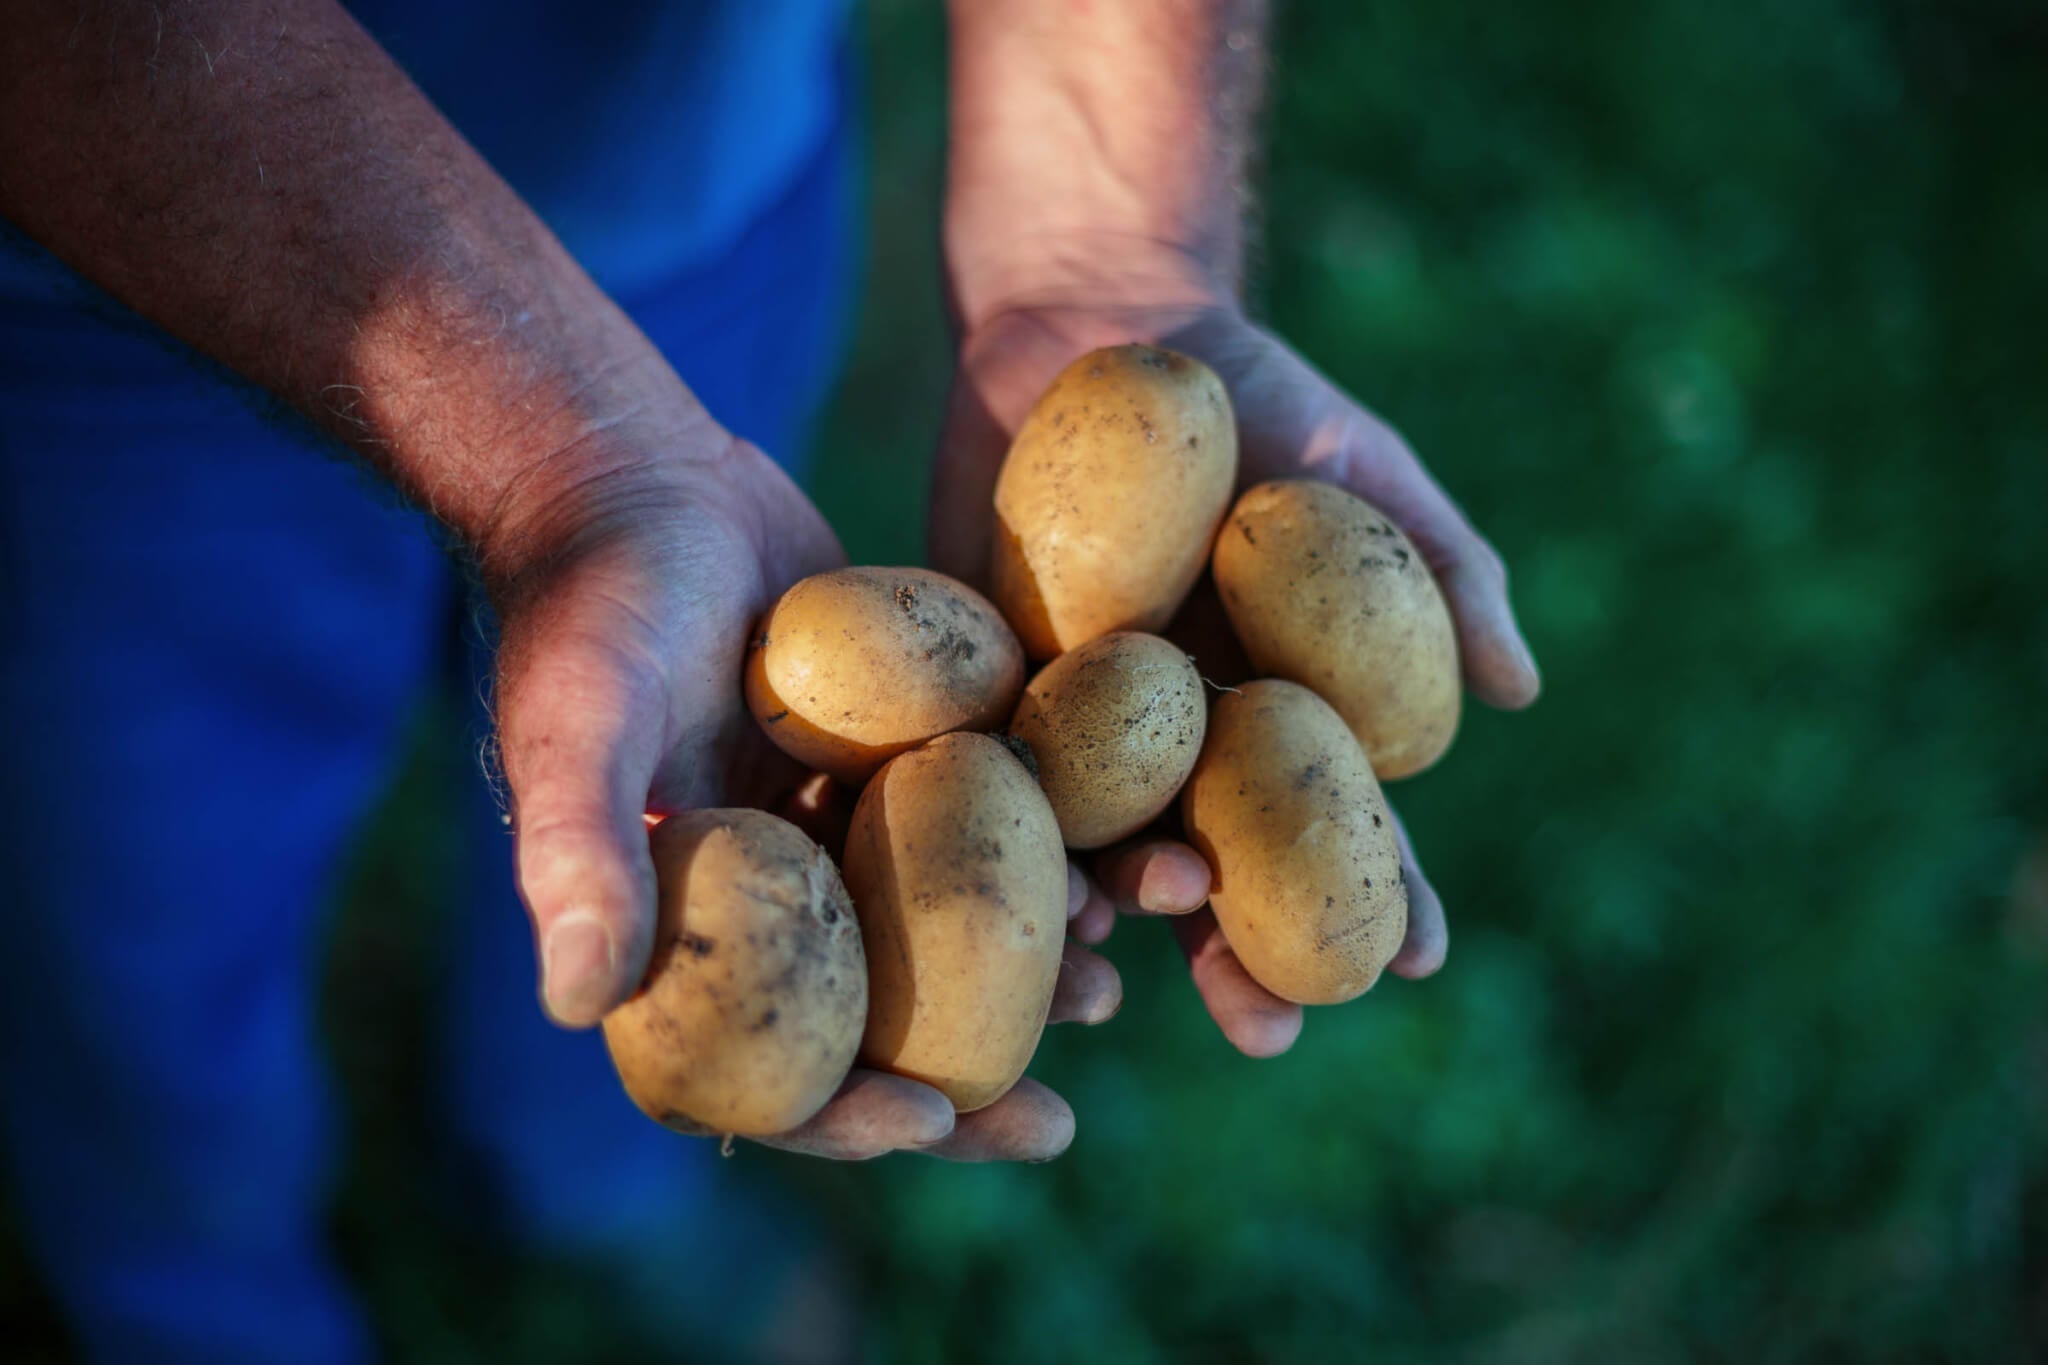 White Potato Varieties: Tips For Growing White Potatoes In The Garden